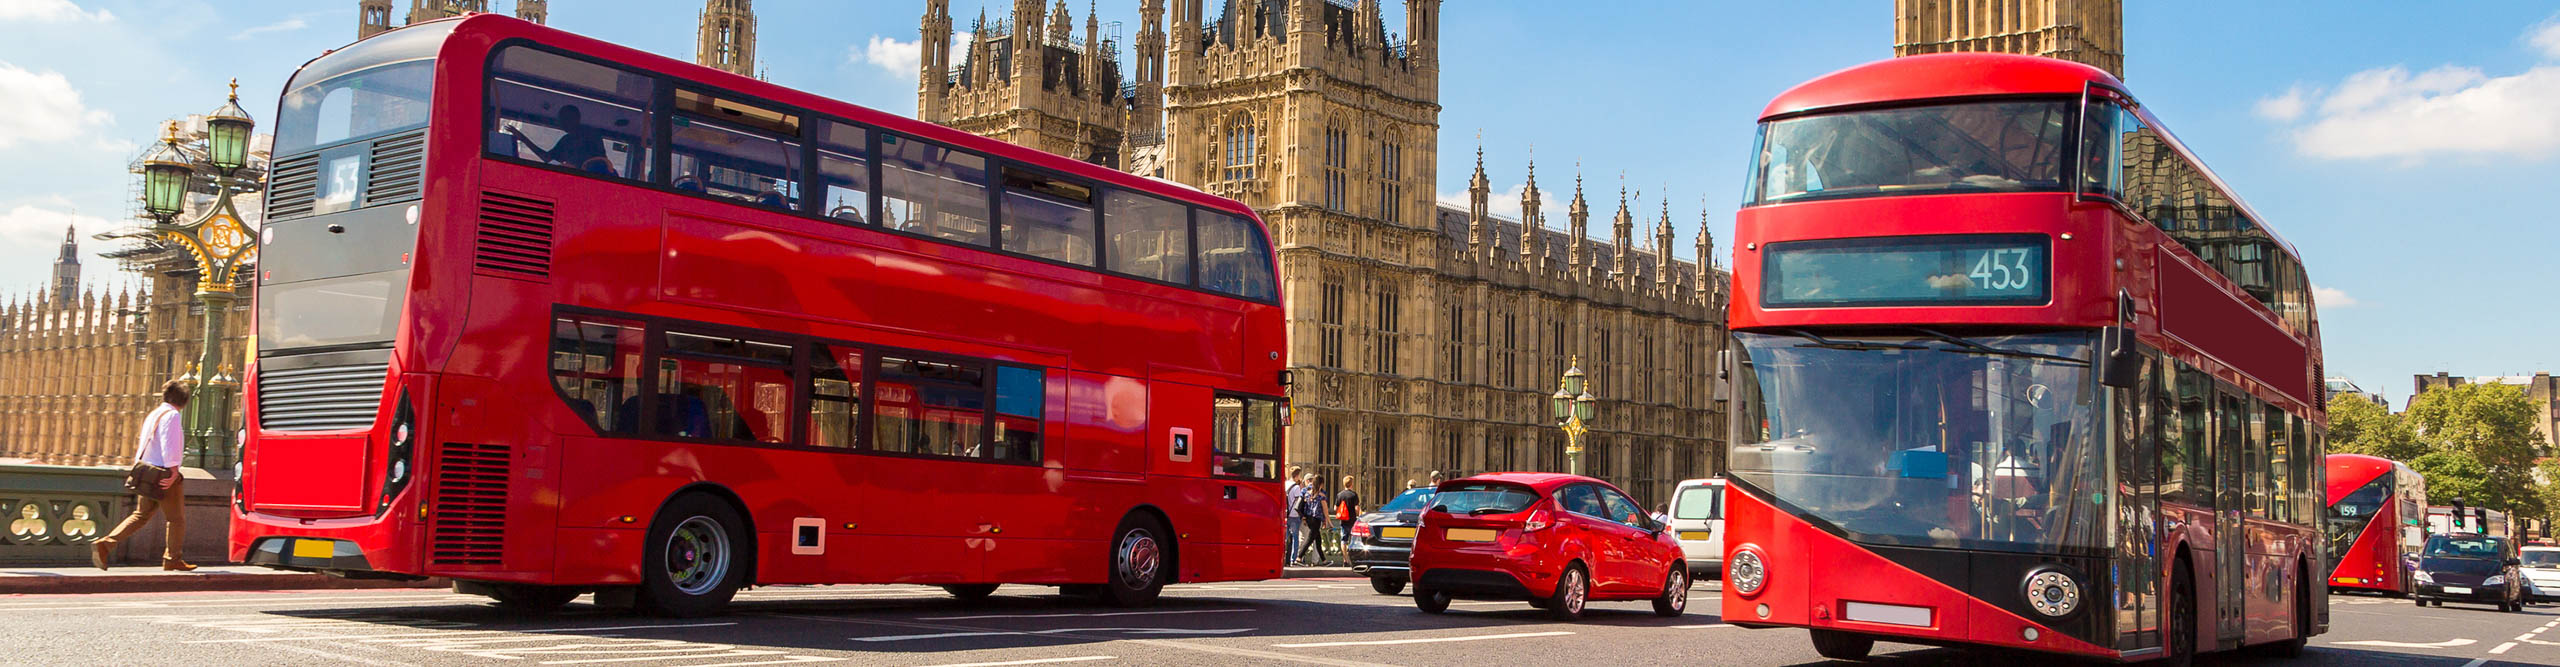  London buses.  driving past the House of Parliament, London, England on a sunny day